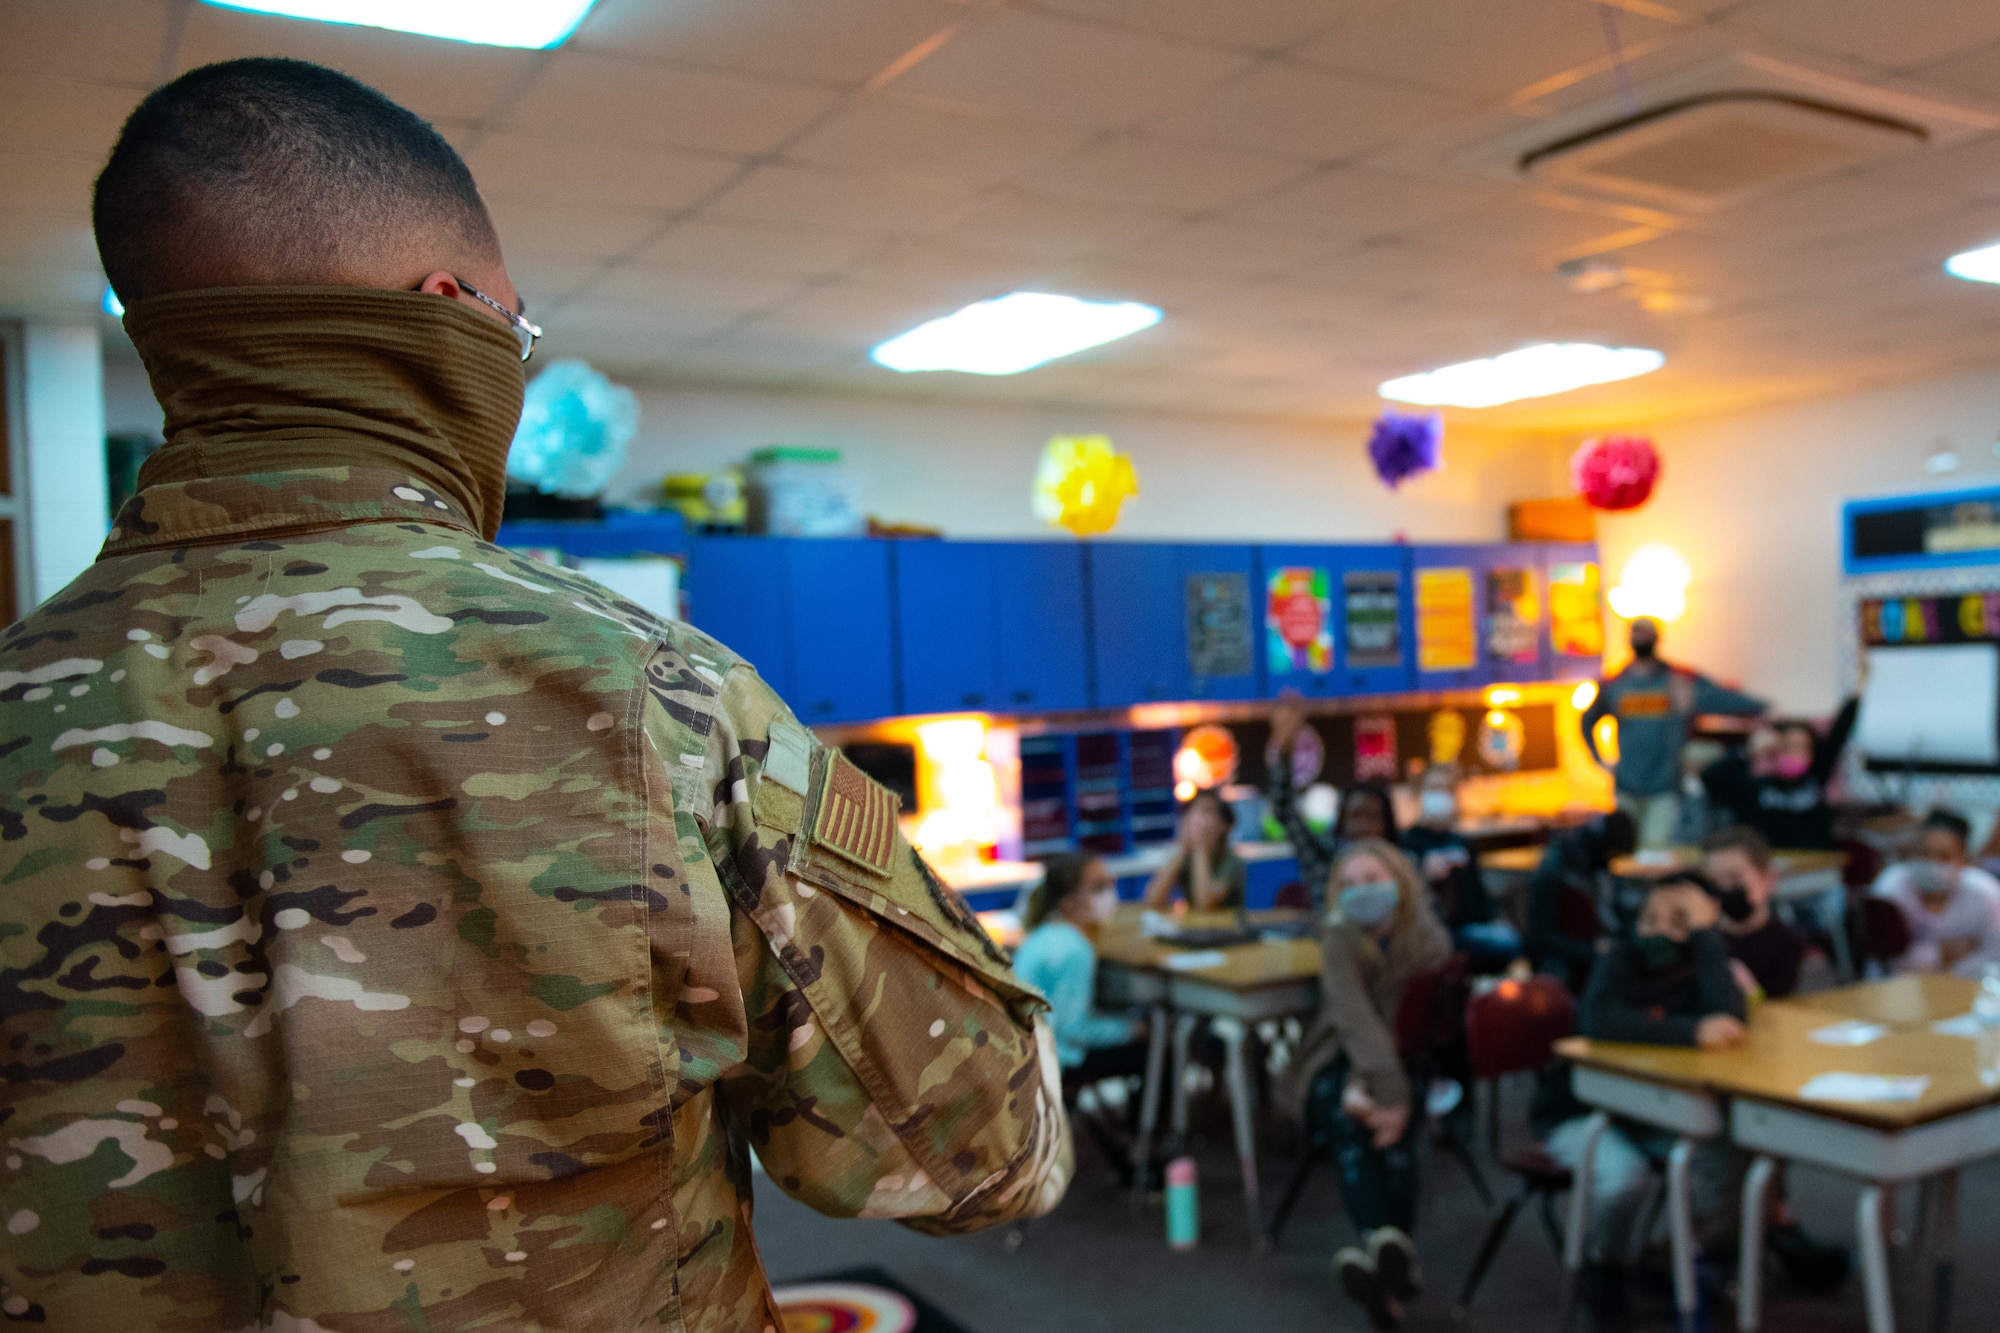 U.S. Air Force Airman 1st Class Dylan Wohlford, an installation entry controller assigned to the 509th Security Forces Squadron, speaks to a class of elementary students at Whiteman Air Force Base, Missouri, on Feb. 26, 2021. During the visit, students asked questions about the Air Force experience and lifestyle. (U.S. Air Force photo by Airman 1st Class Devan Halstead)